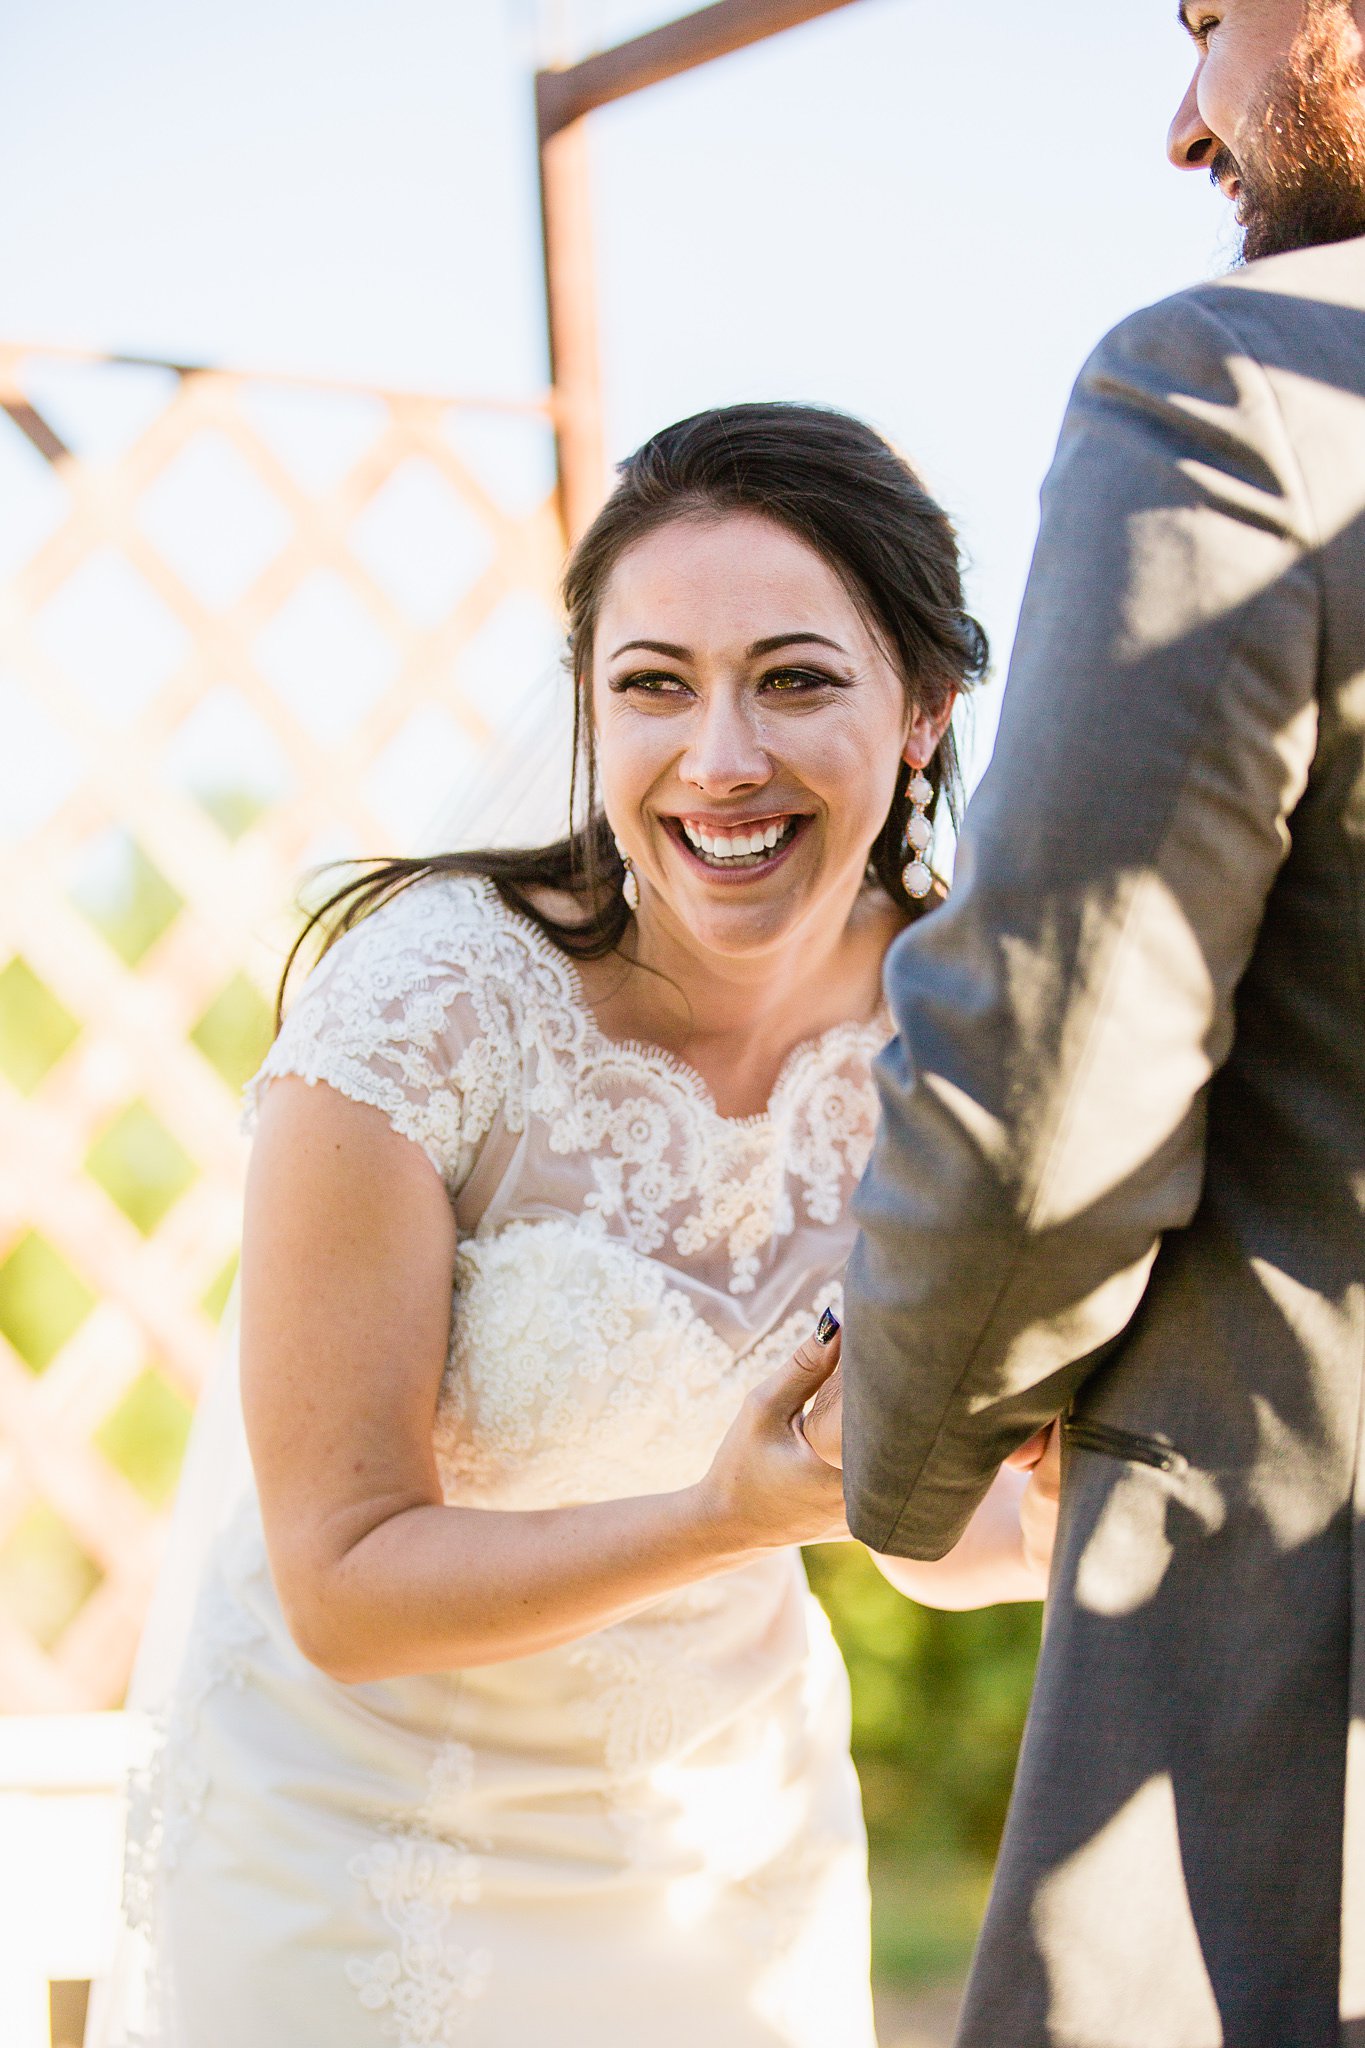 Bride laughing with tears in her eyes during her wedding ceremony at the Schnepf Farm's Farmhouse by Arizona wedding photographer PMA Photography.